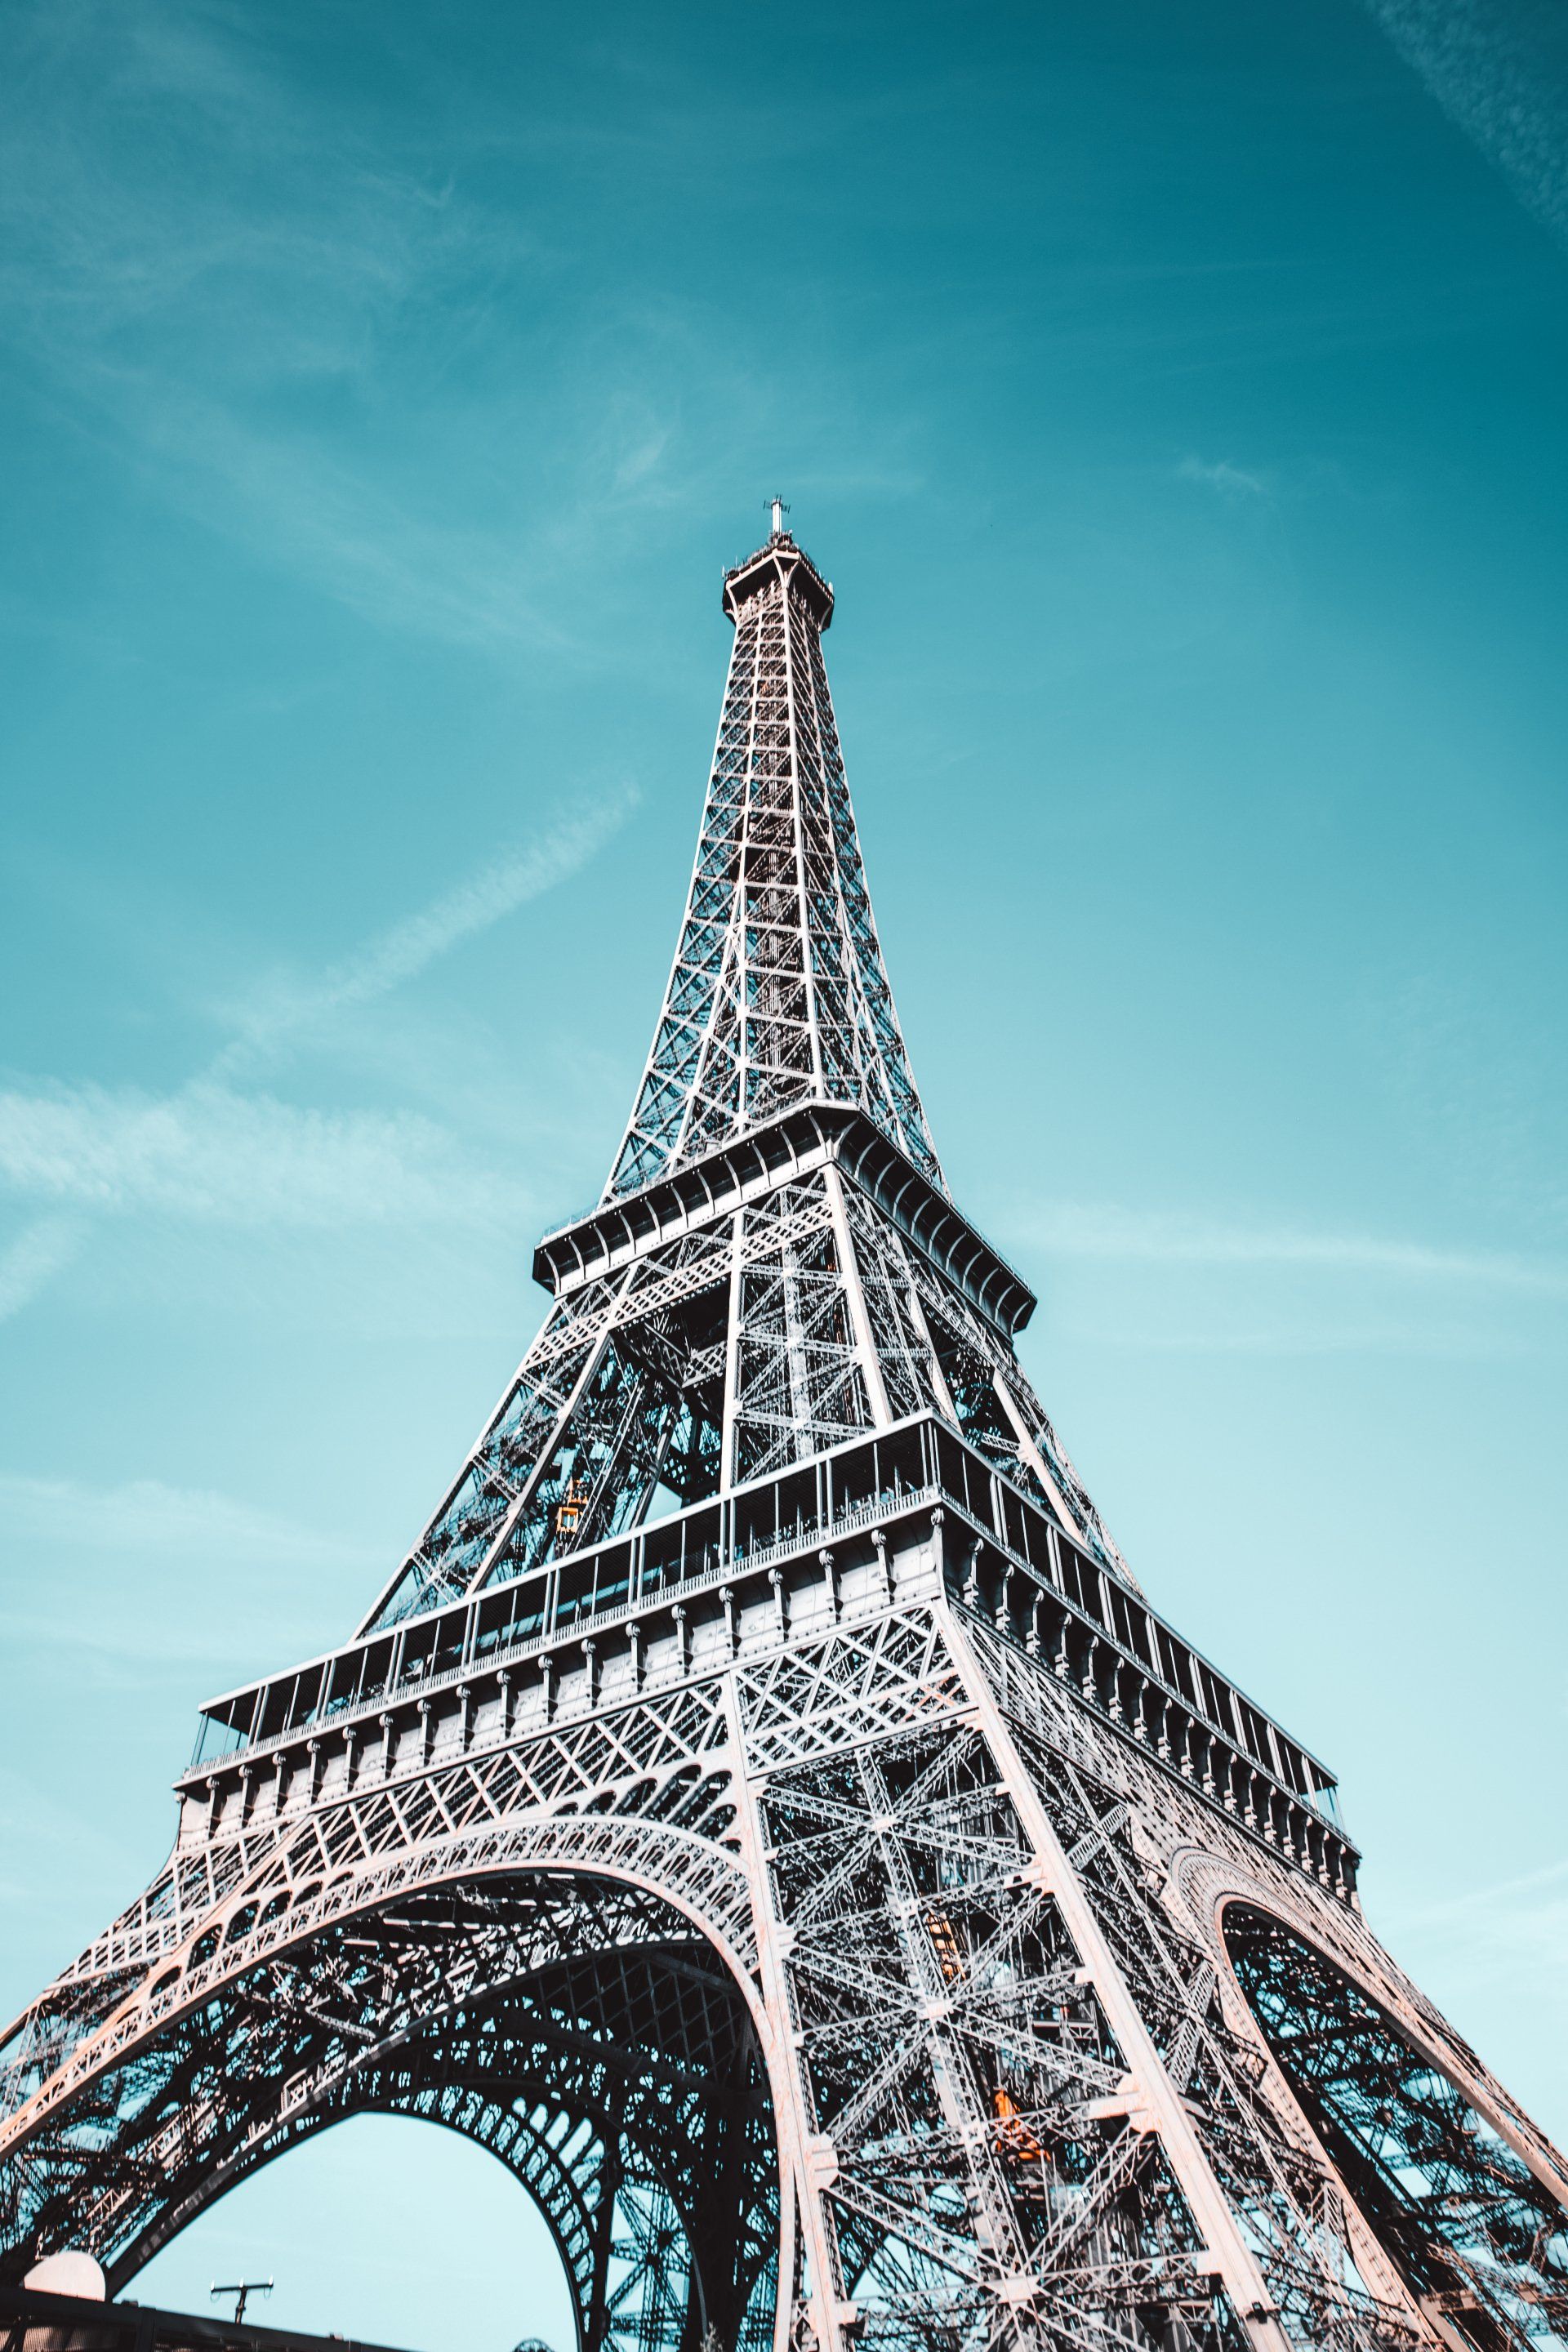 Some of the most famous landmarks in Paris include the Eiffel Tower, the Louvre Museum & Notre Dame